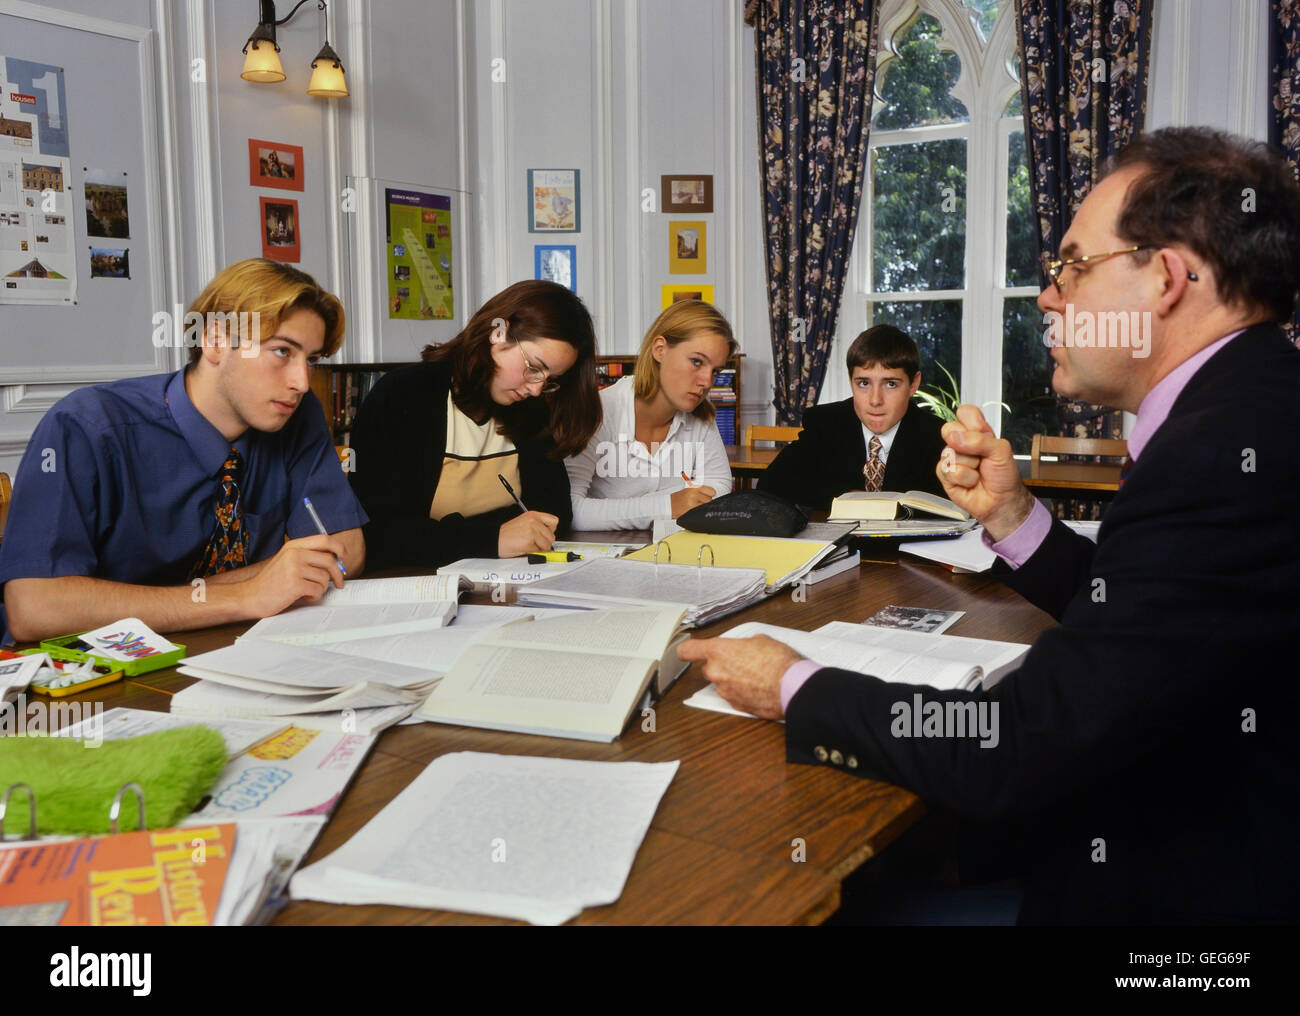 6th form students studying with a teacher. England. Europe Stock Photo